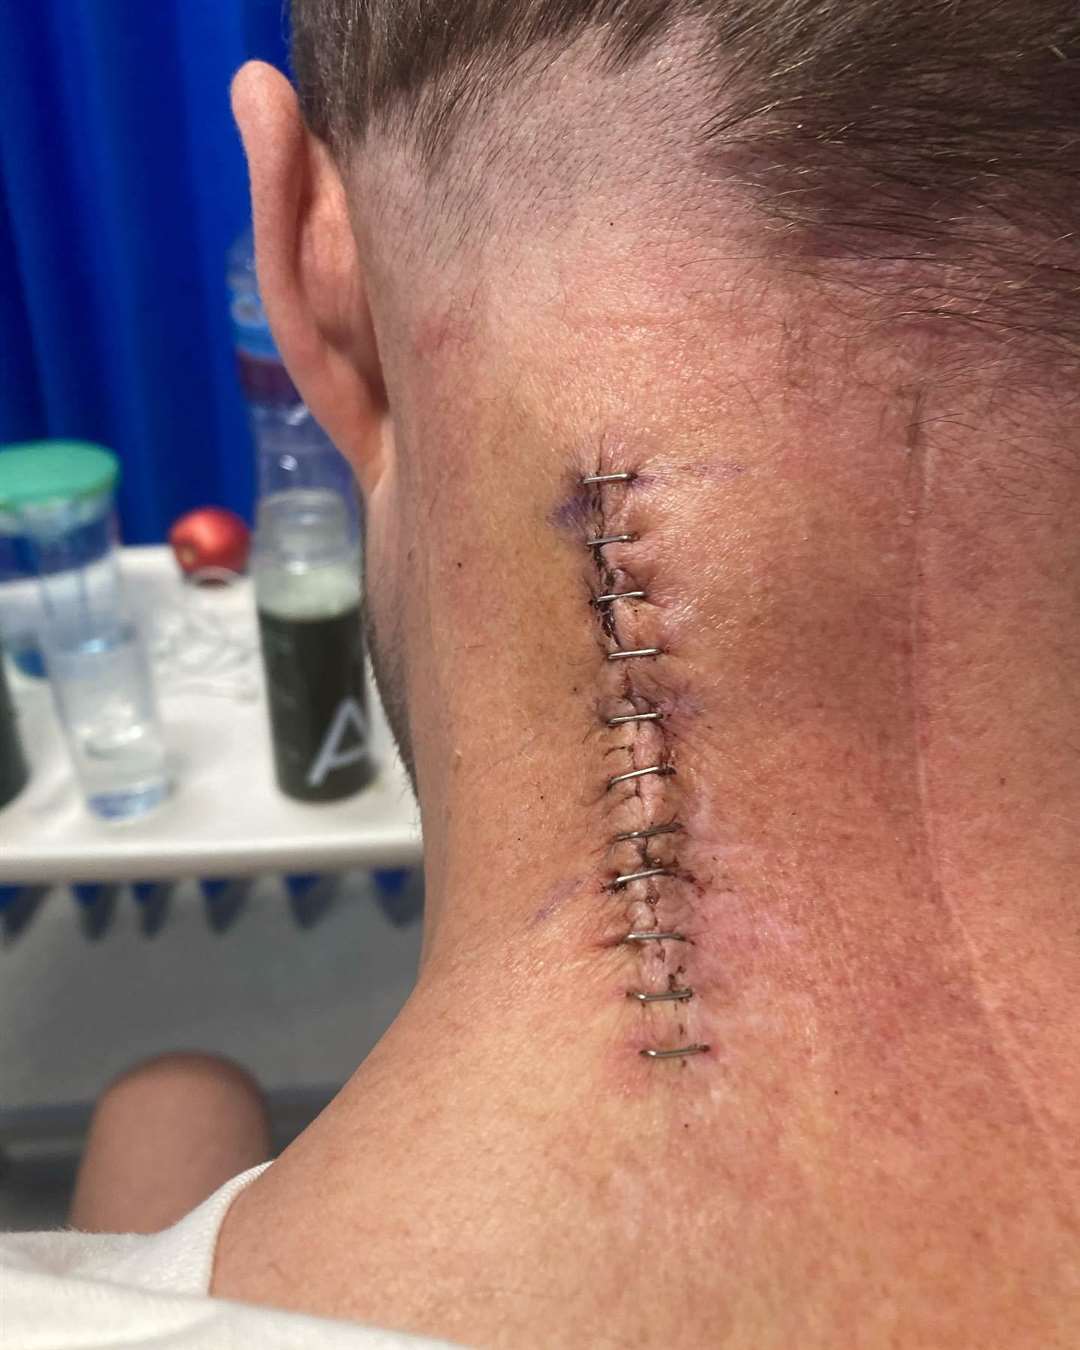 Neat job: Dave Smith after the latest surgery this week.